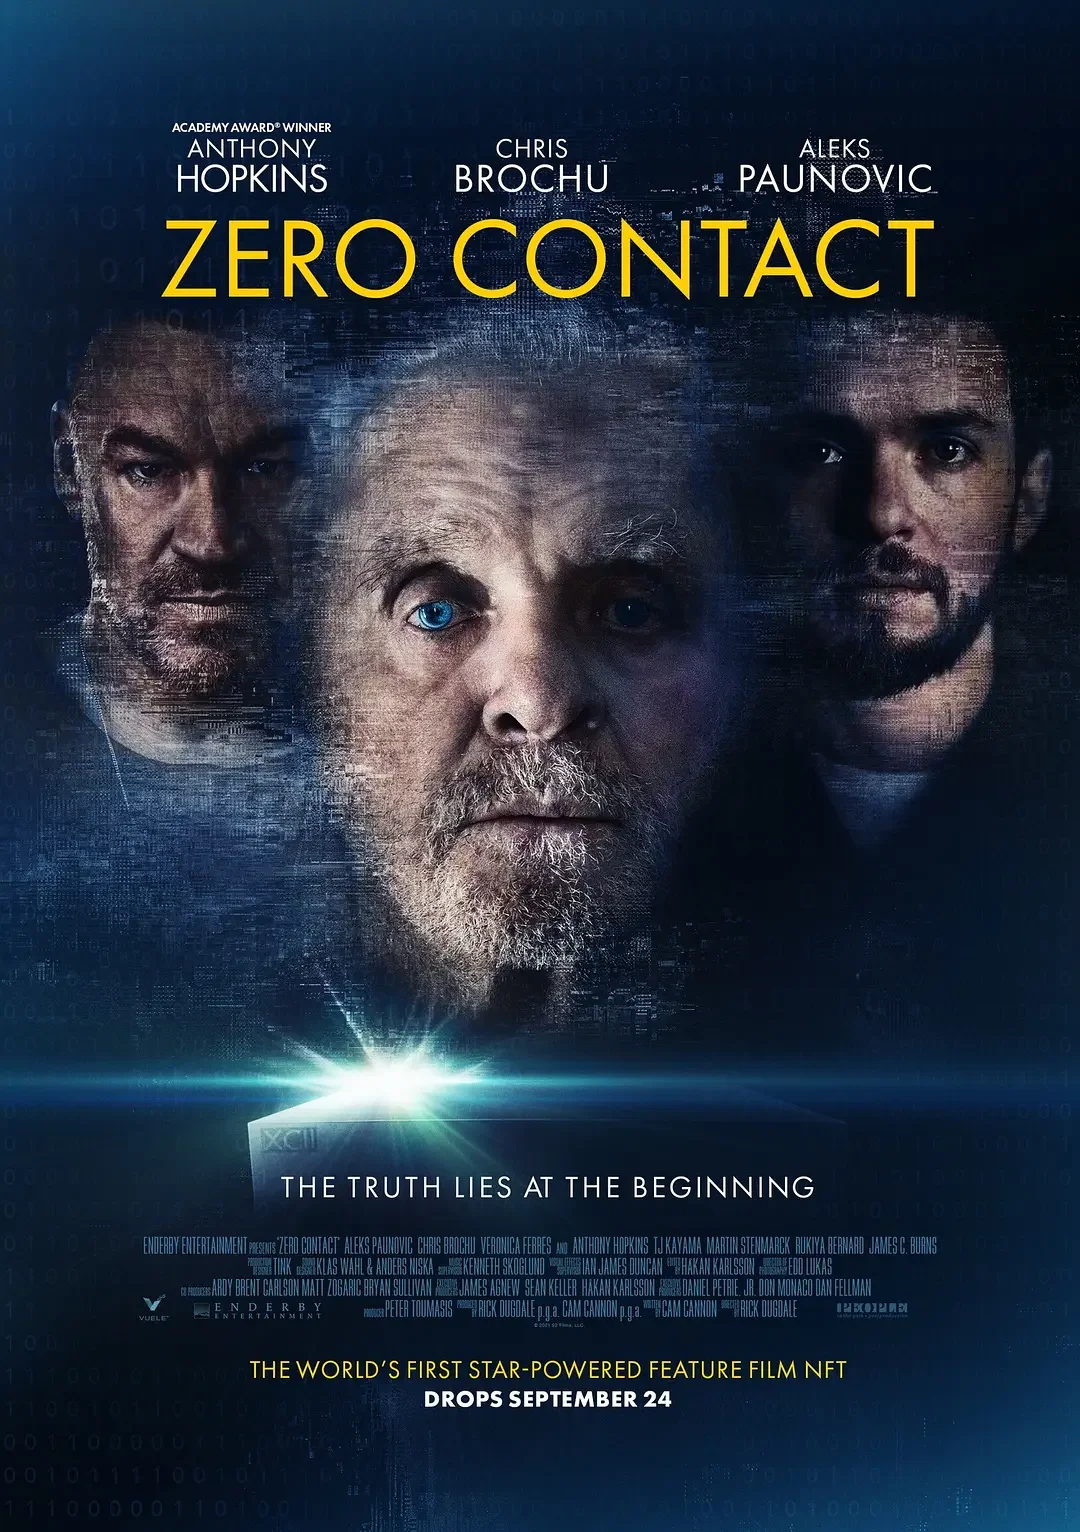 Anthony Hopkins' new film "Zero Contact‎" Releases Official Trailer, which opens in select theaters in Northern America on May 27